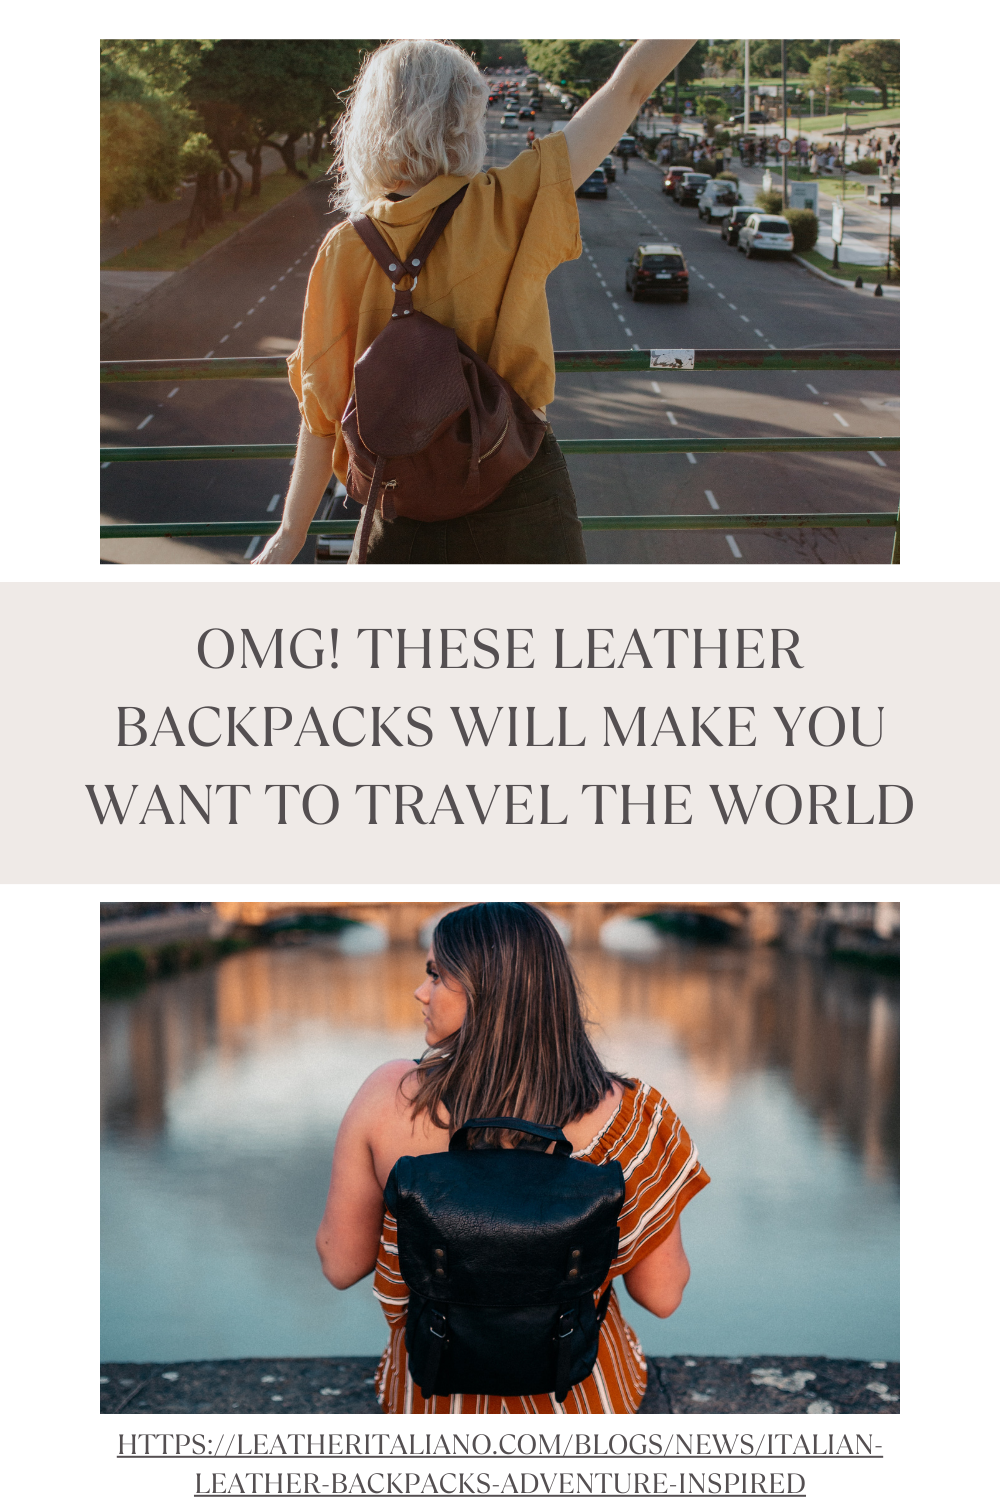 A diverse group of travelers exploring a city, all carrying stylish Italian leather backpacks.